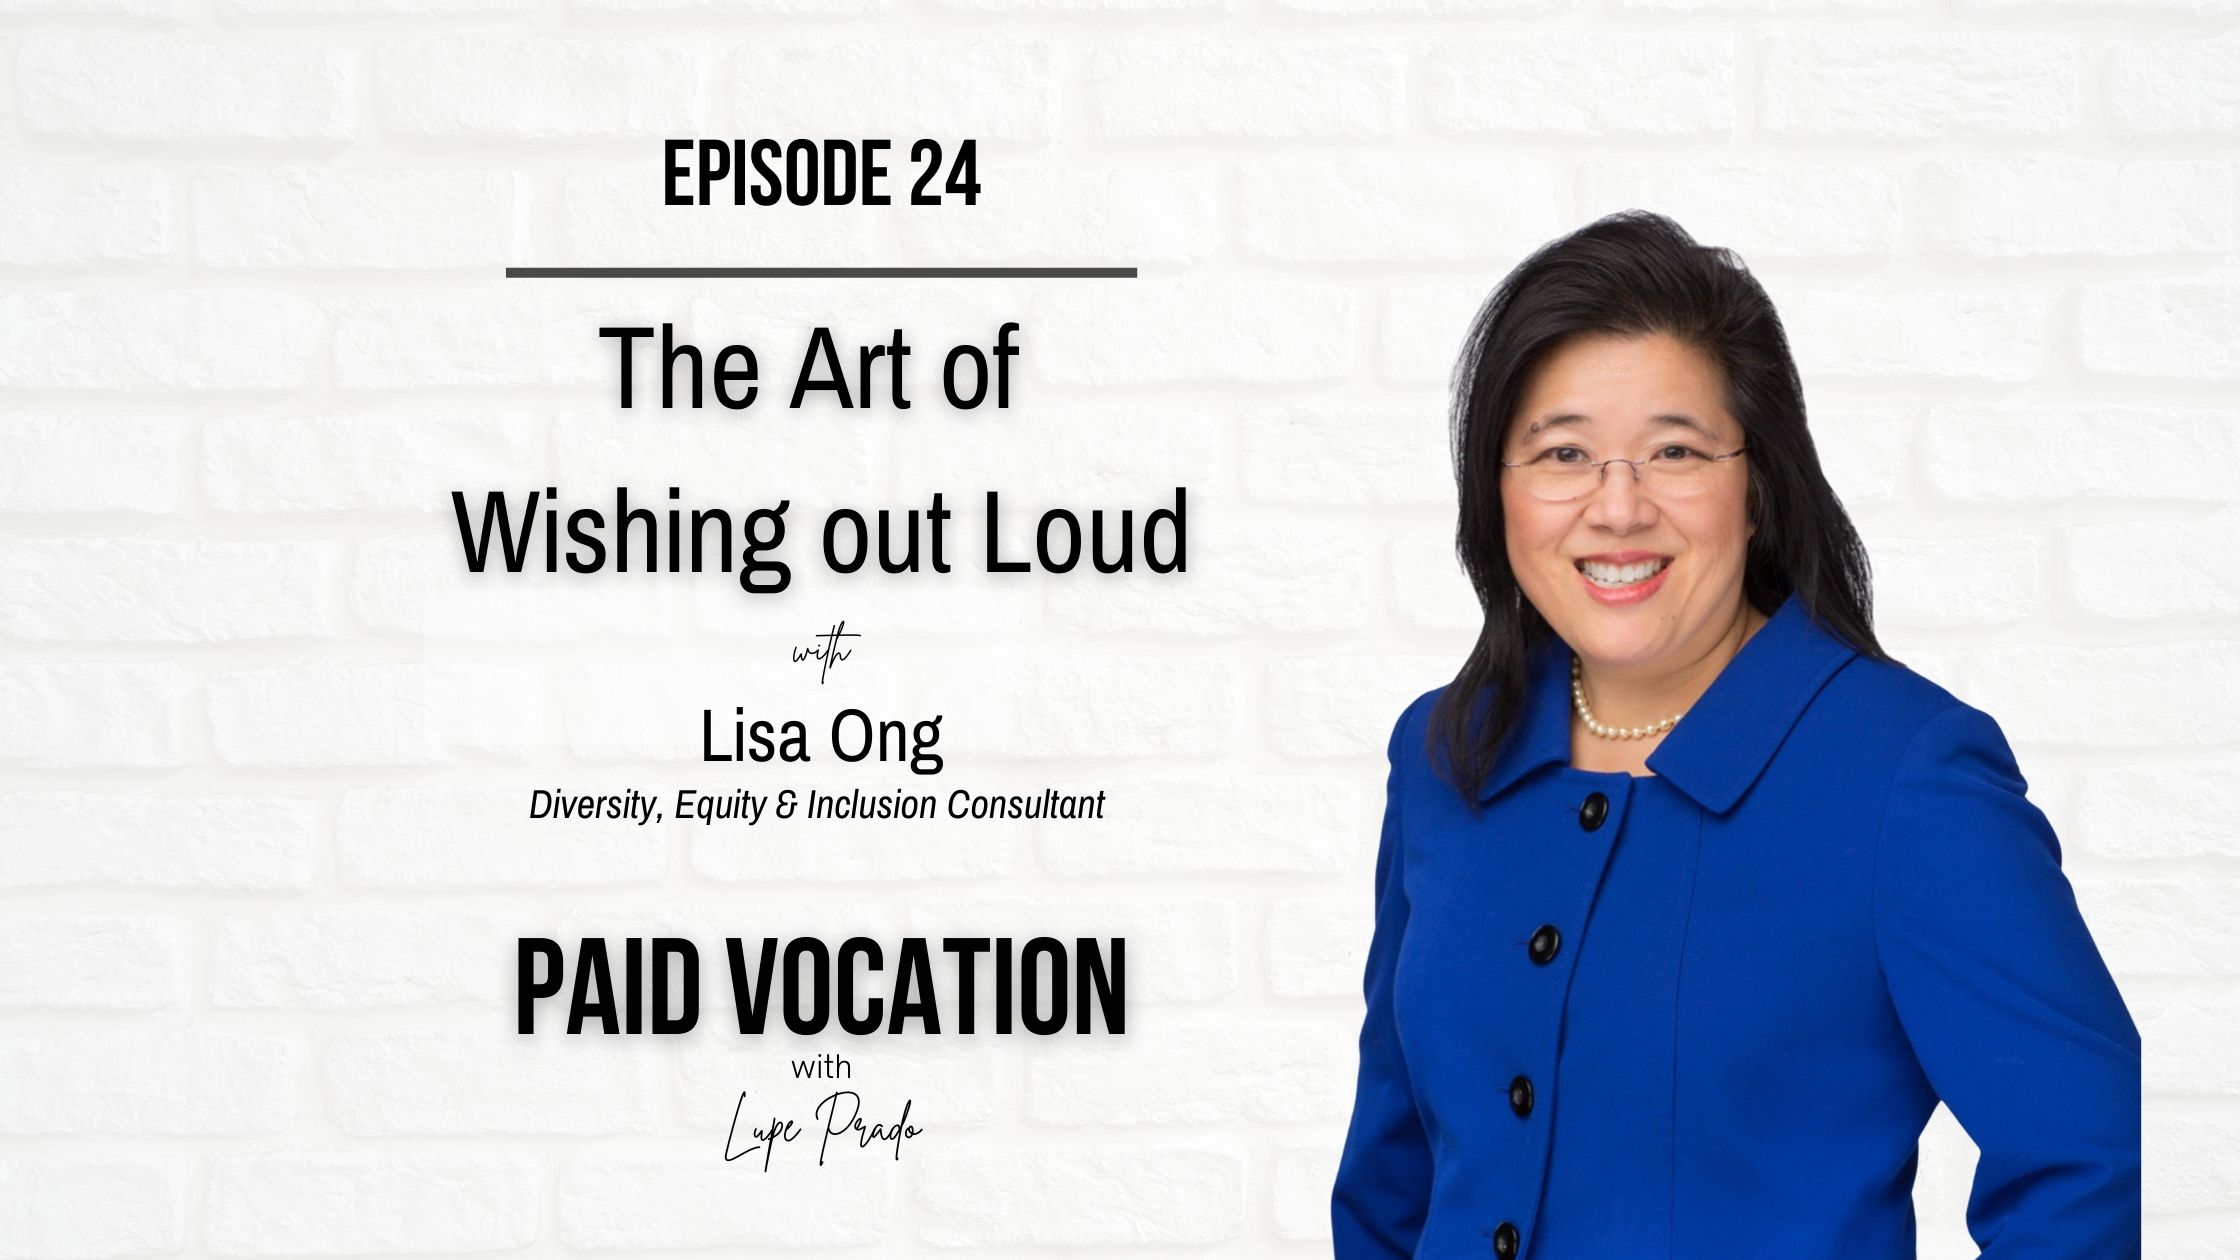 The Art of Wishing out Loud | Lisa Ong